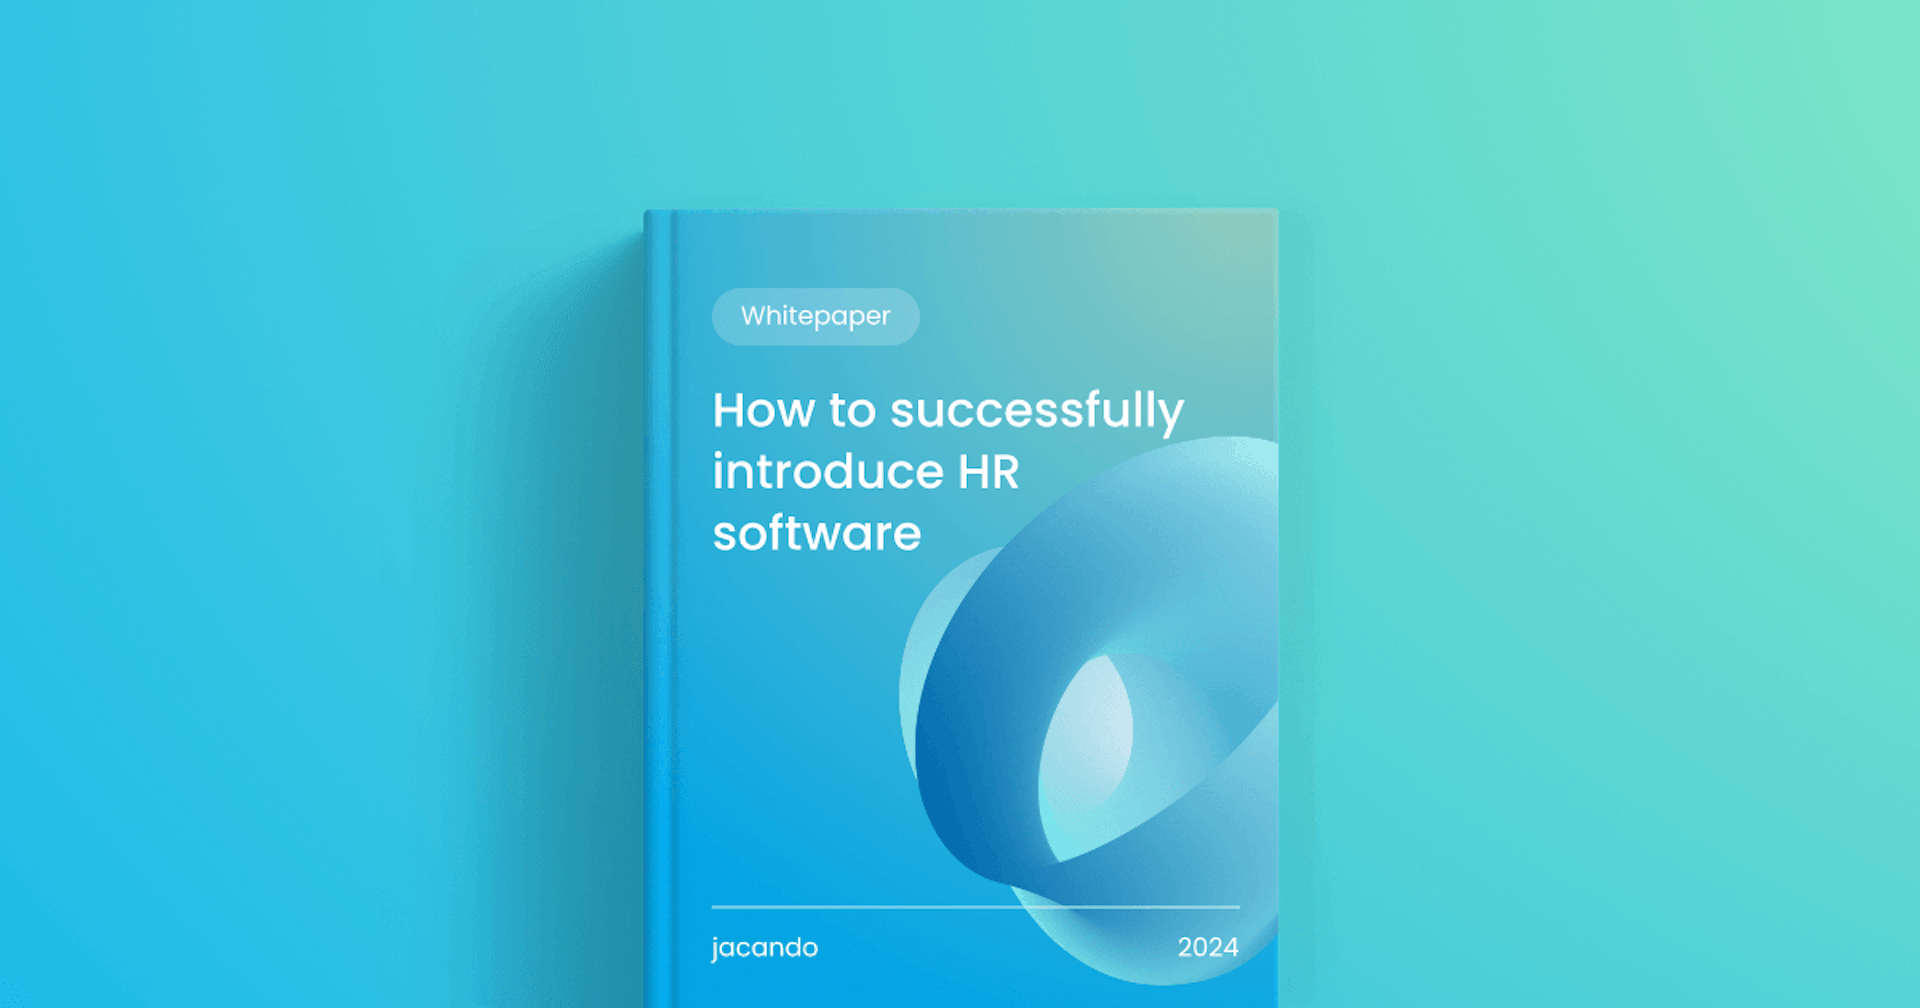 How to successfully introduce HR software